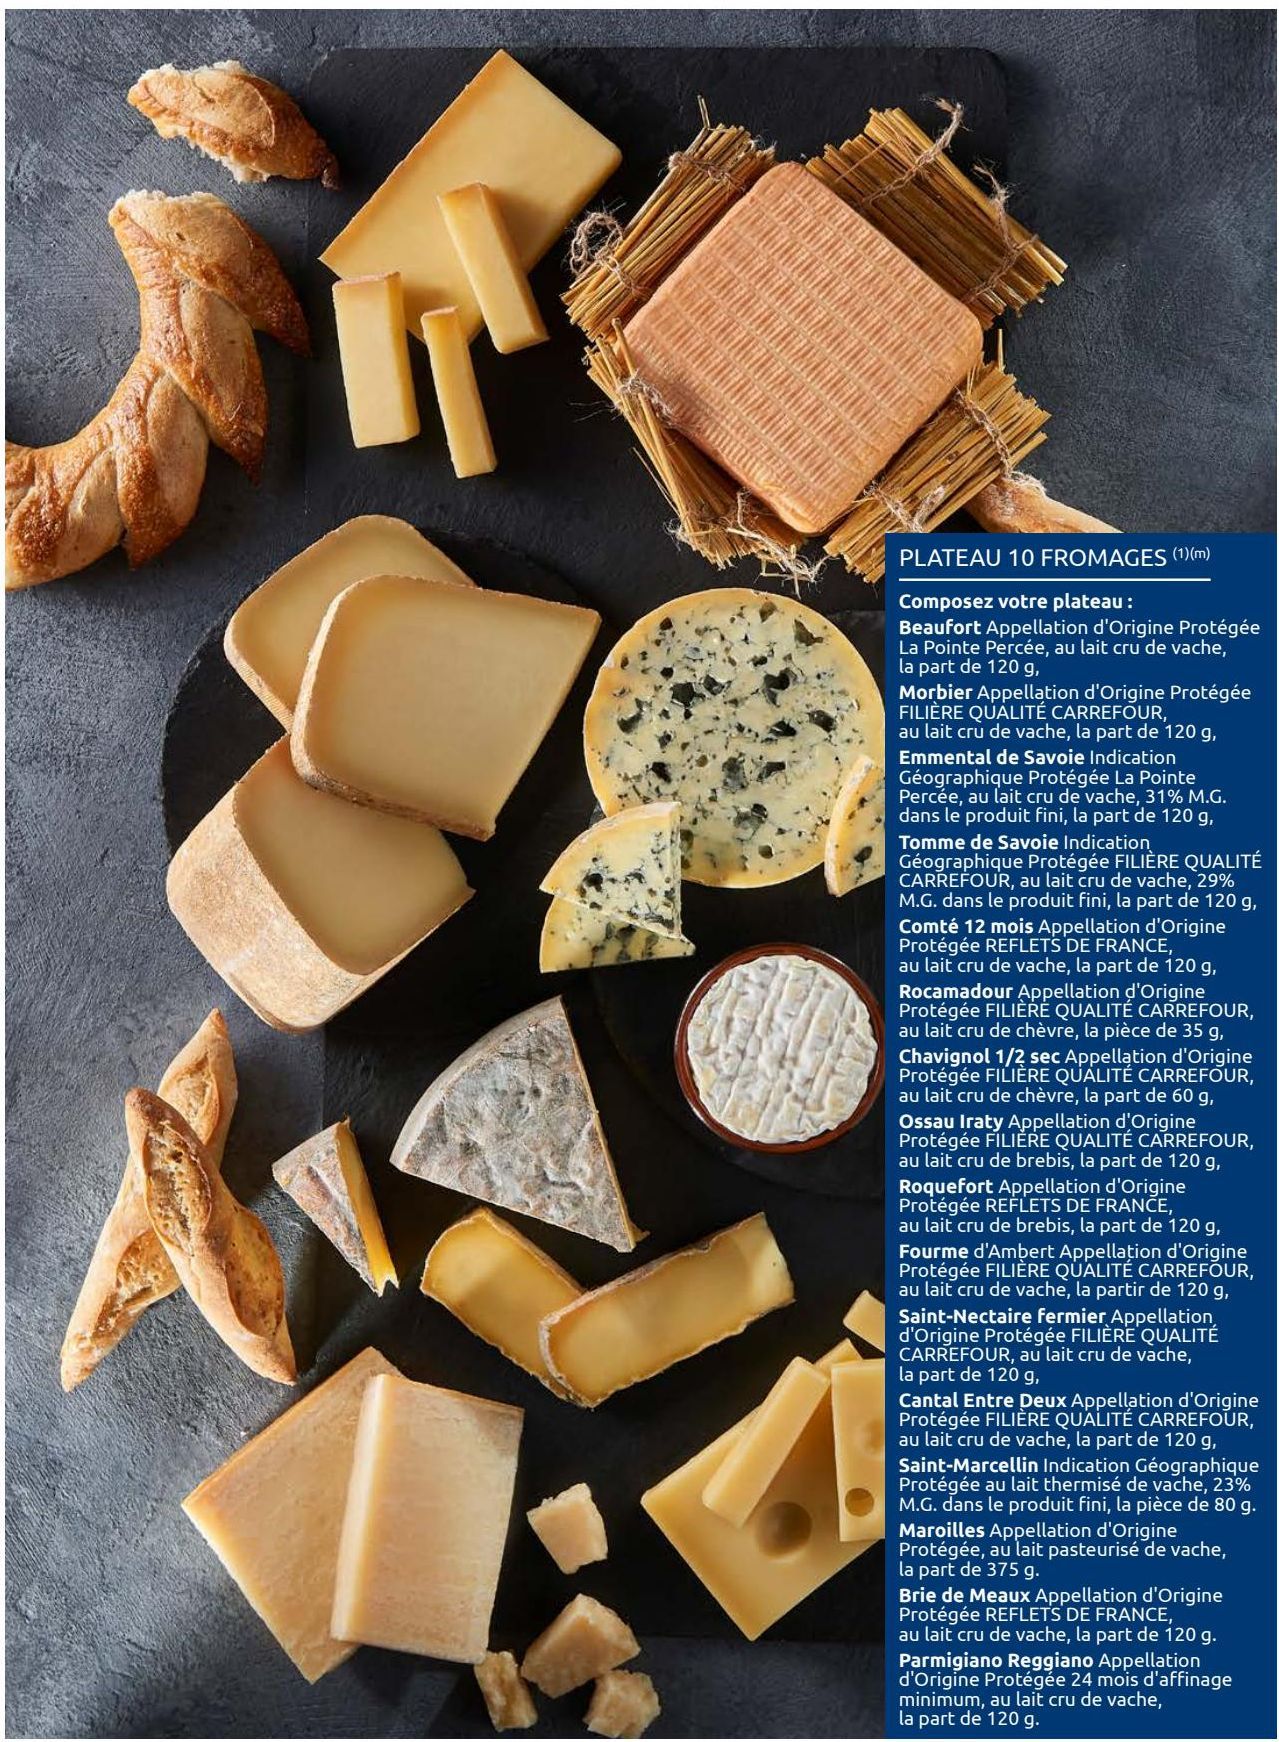 PLATEAU 10 FROMAGES